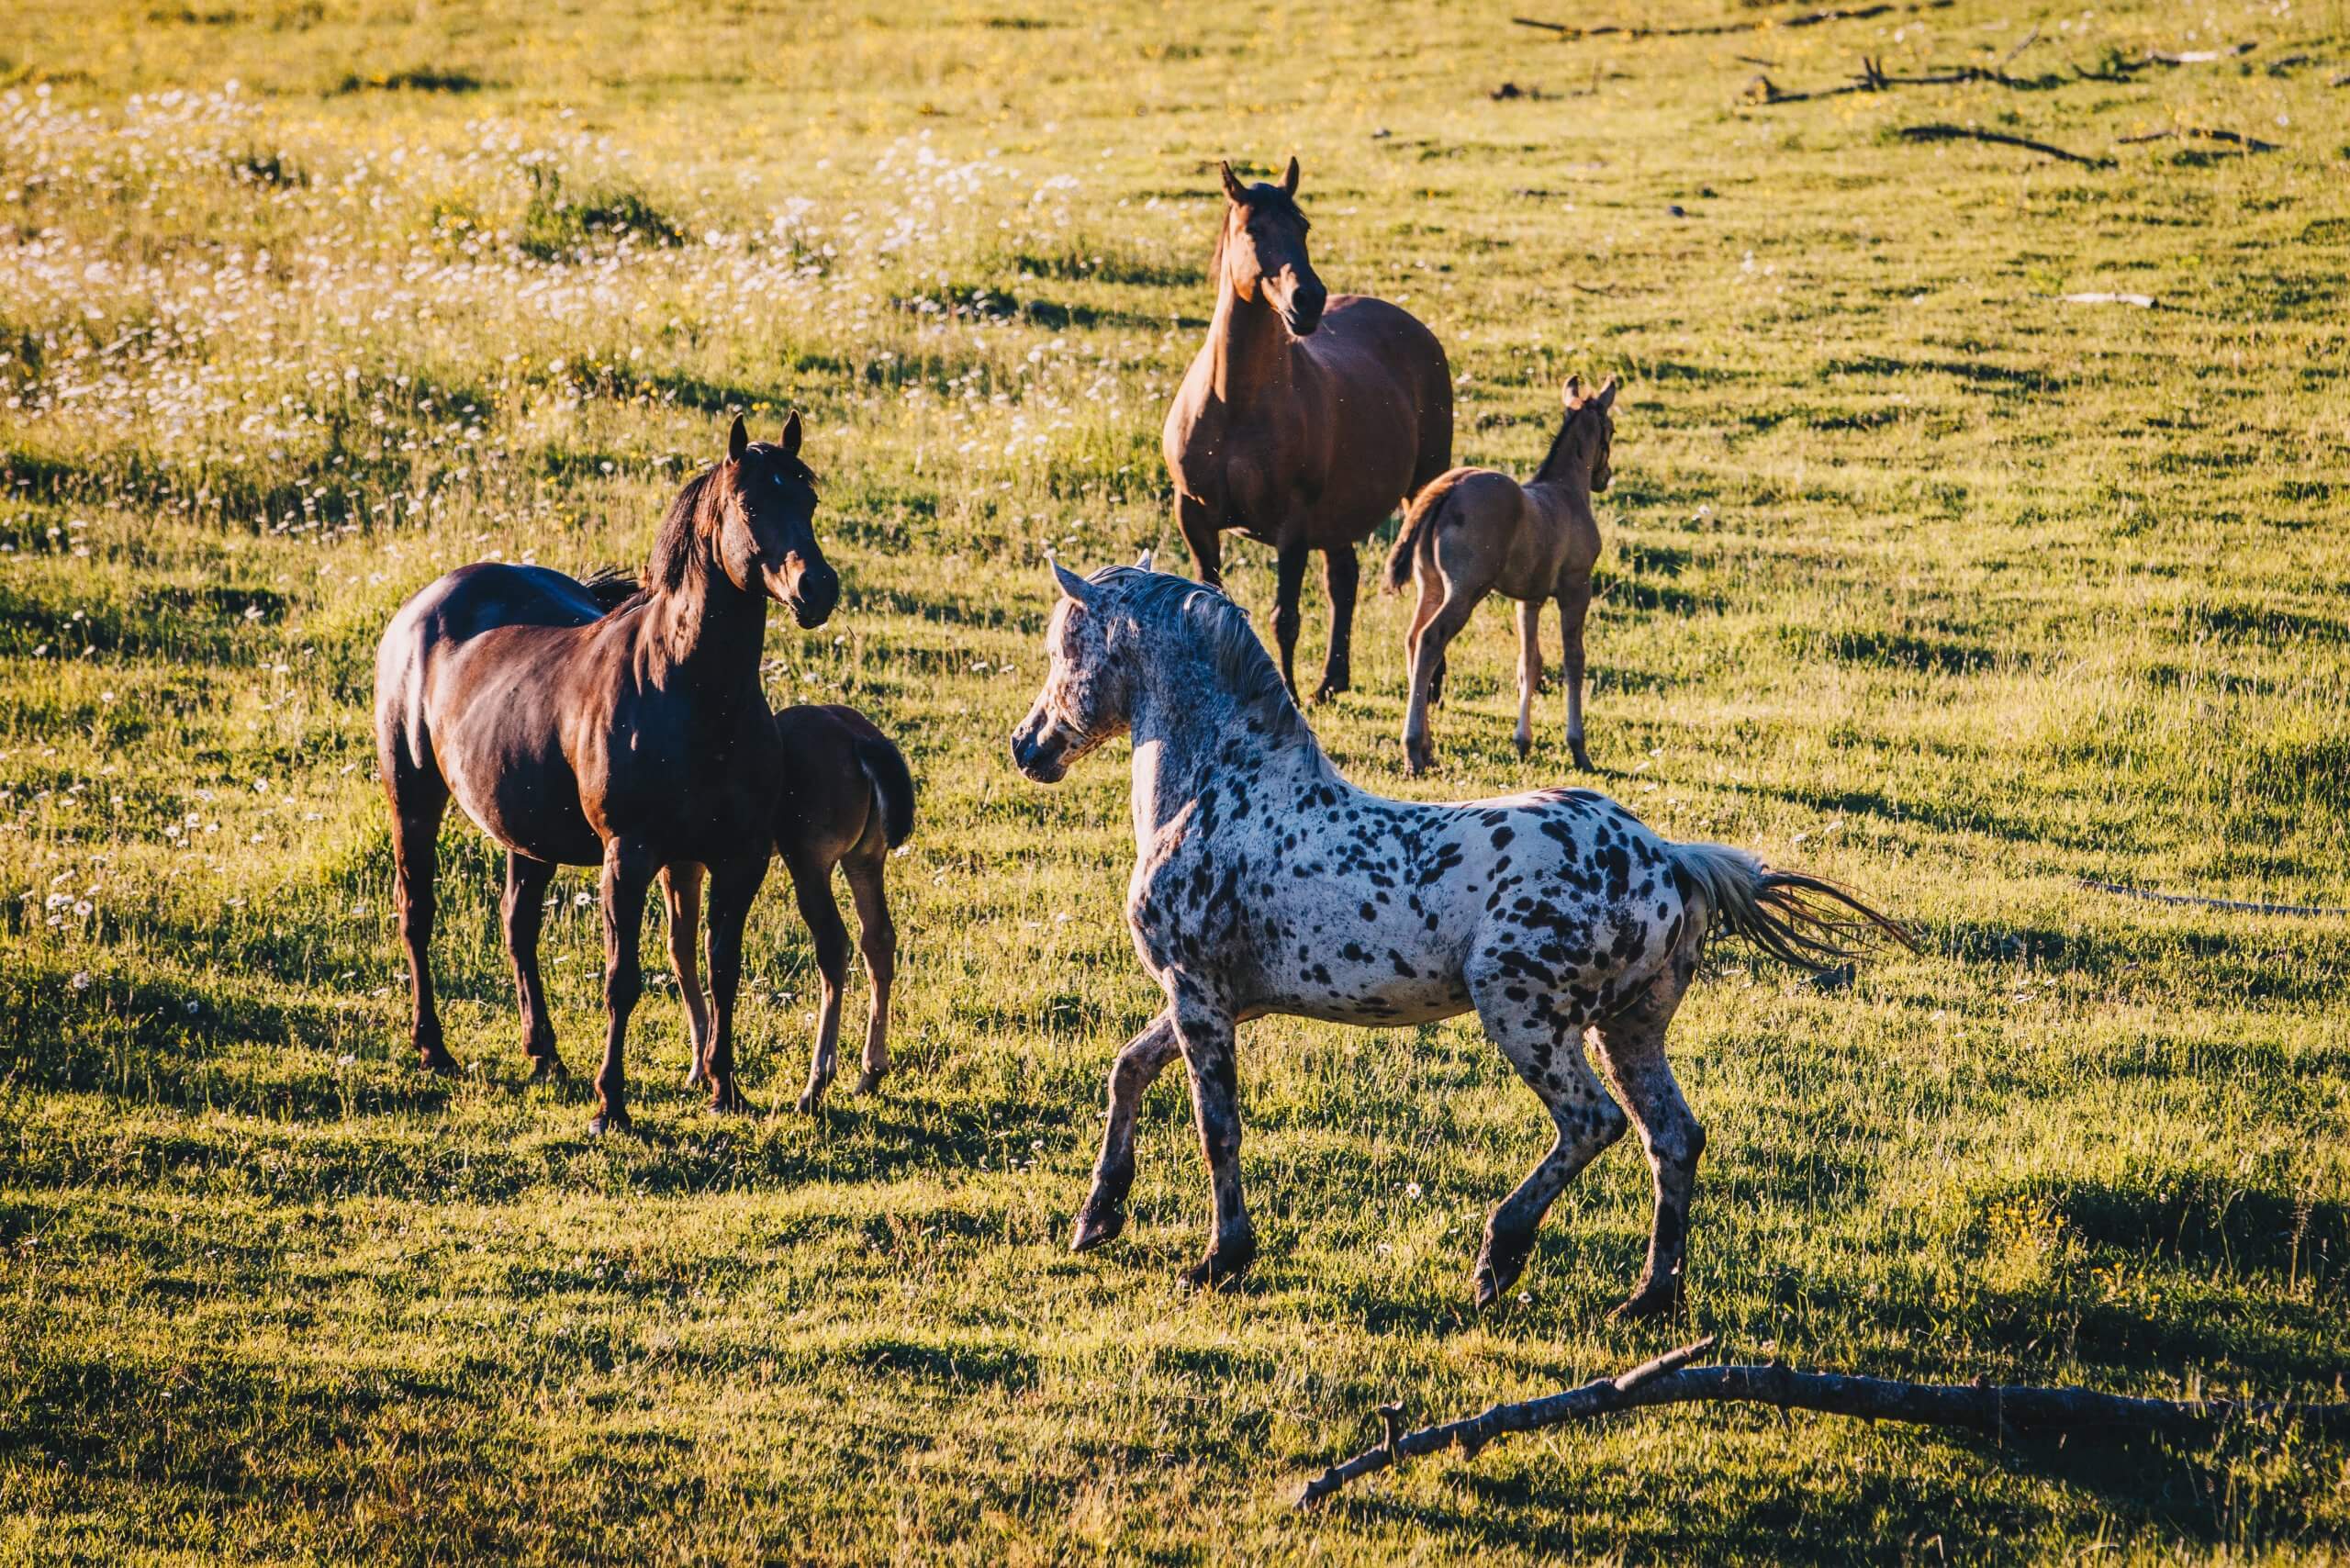 Horses and foals play in a grassy field at golden hour.